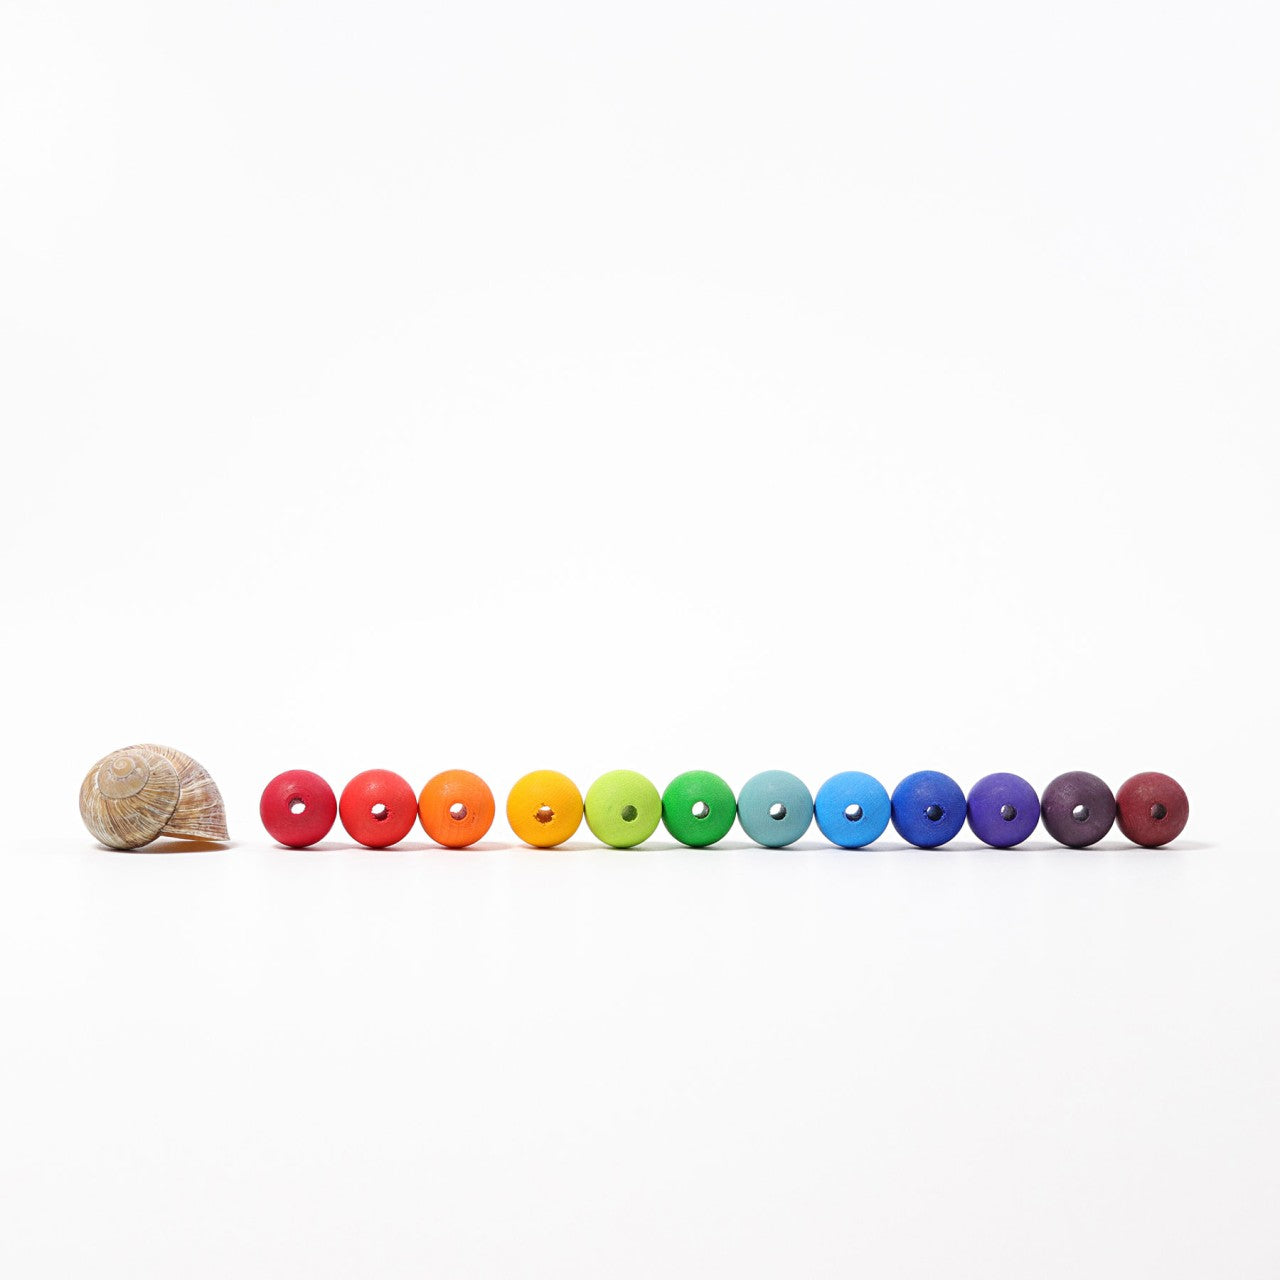 60 Wooden Beads | Sorting & Stacking Toys for Kids